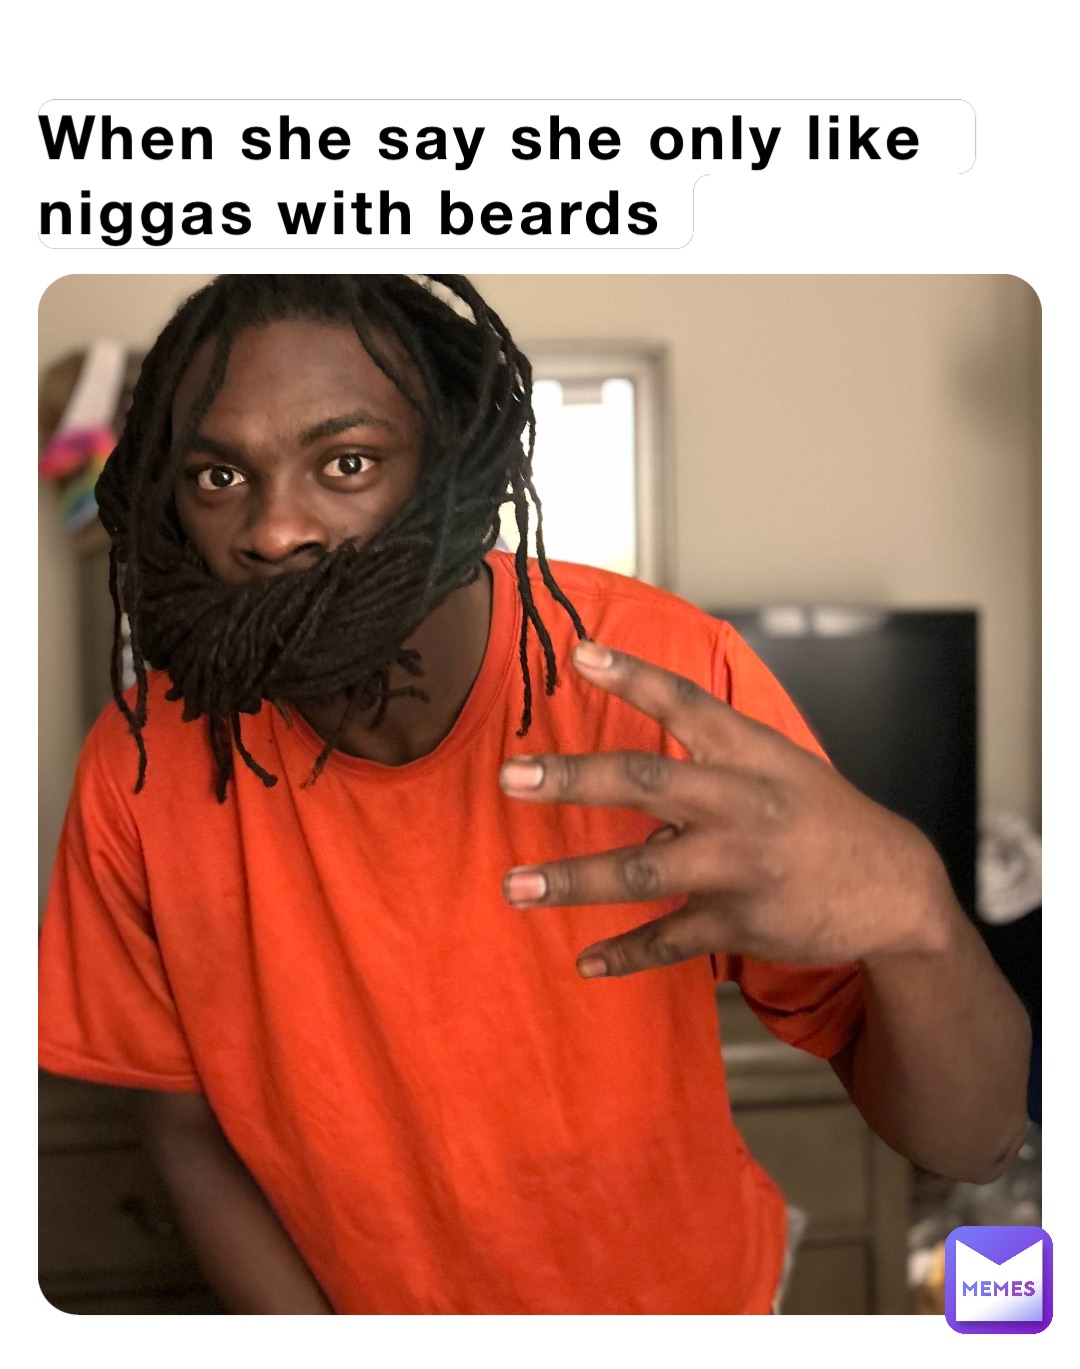 When she say she only like niggas with beards